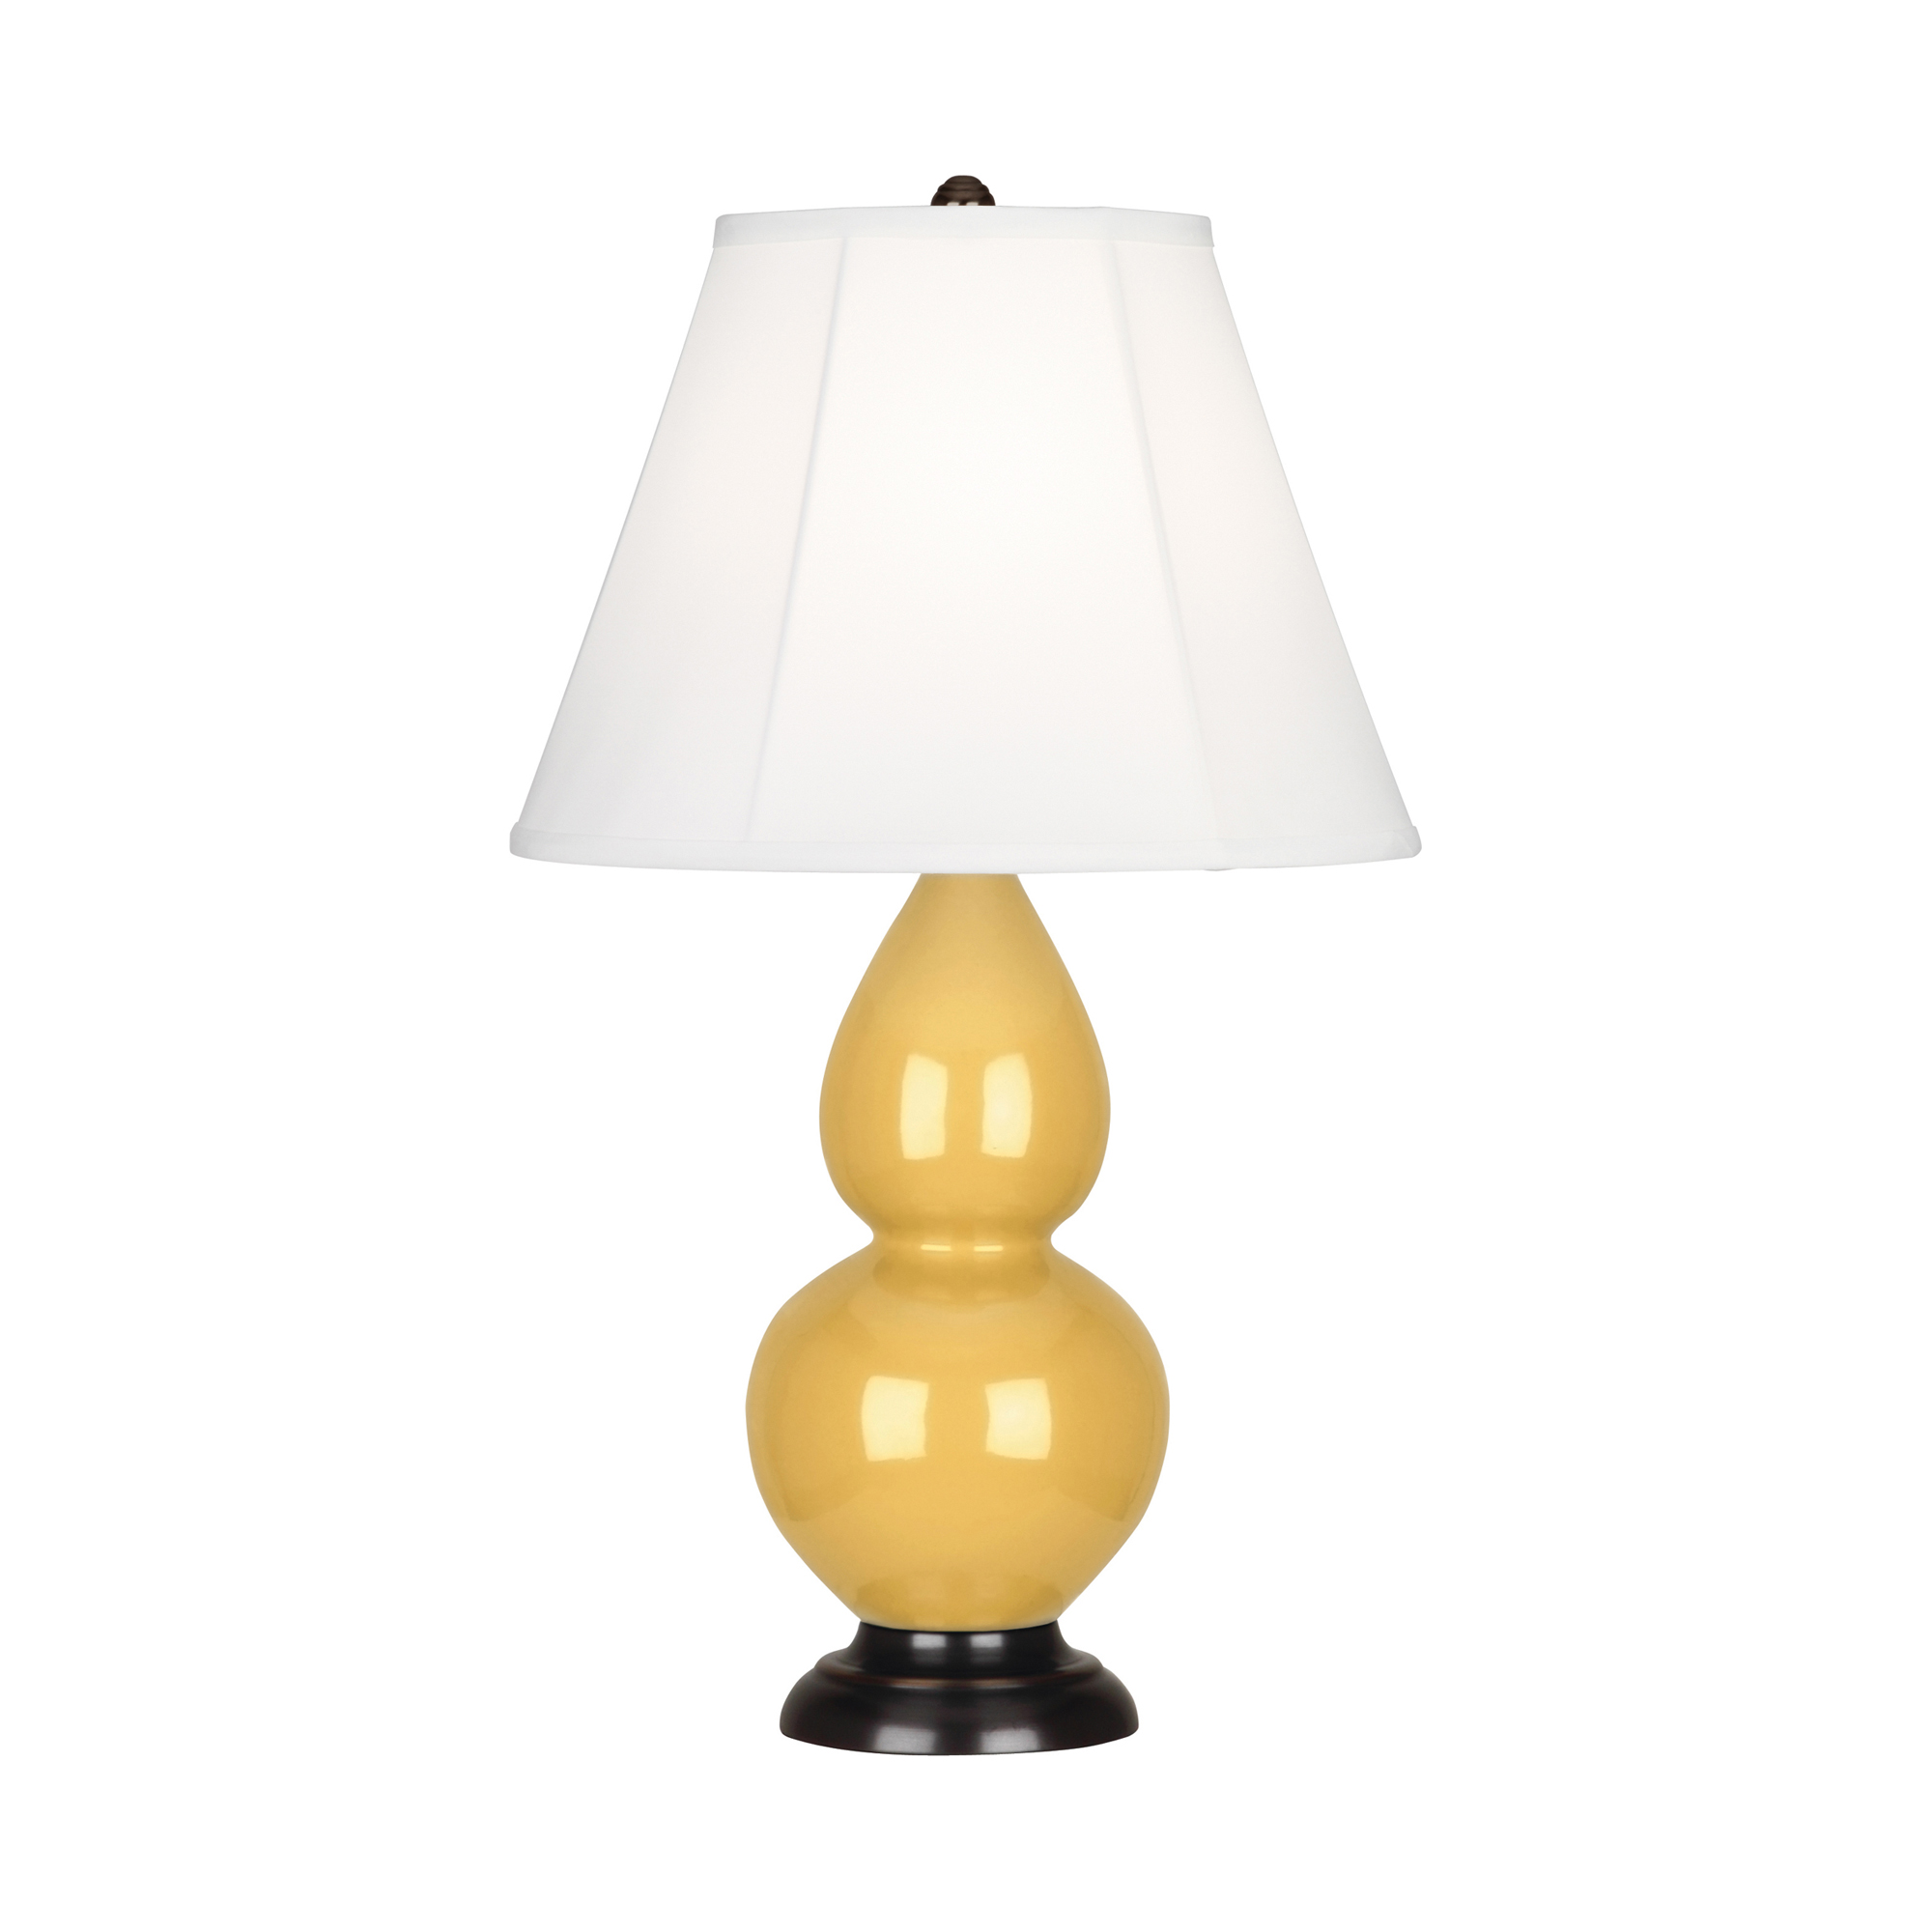 Small Double Gourd Accent Lamp Style #SU11